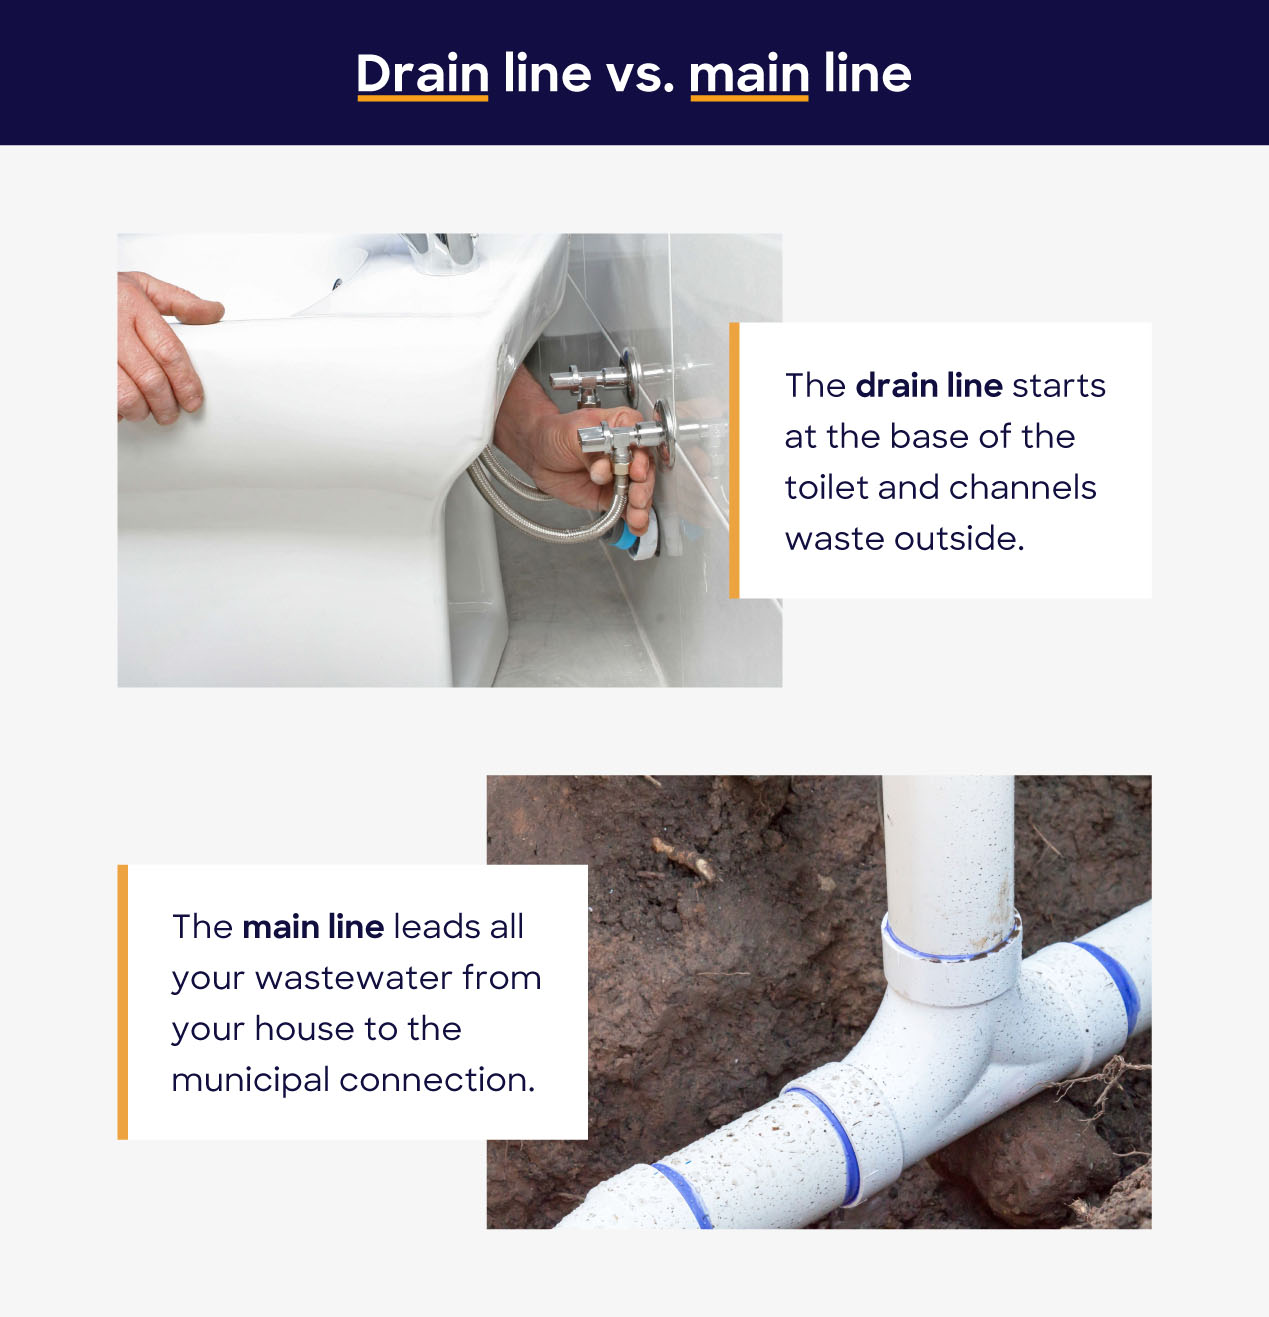 image comparing a drain line vs. main line. Drain line starts in the house. The main line leads waste from the home to the municipal connection.